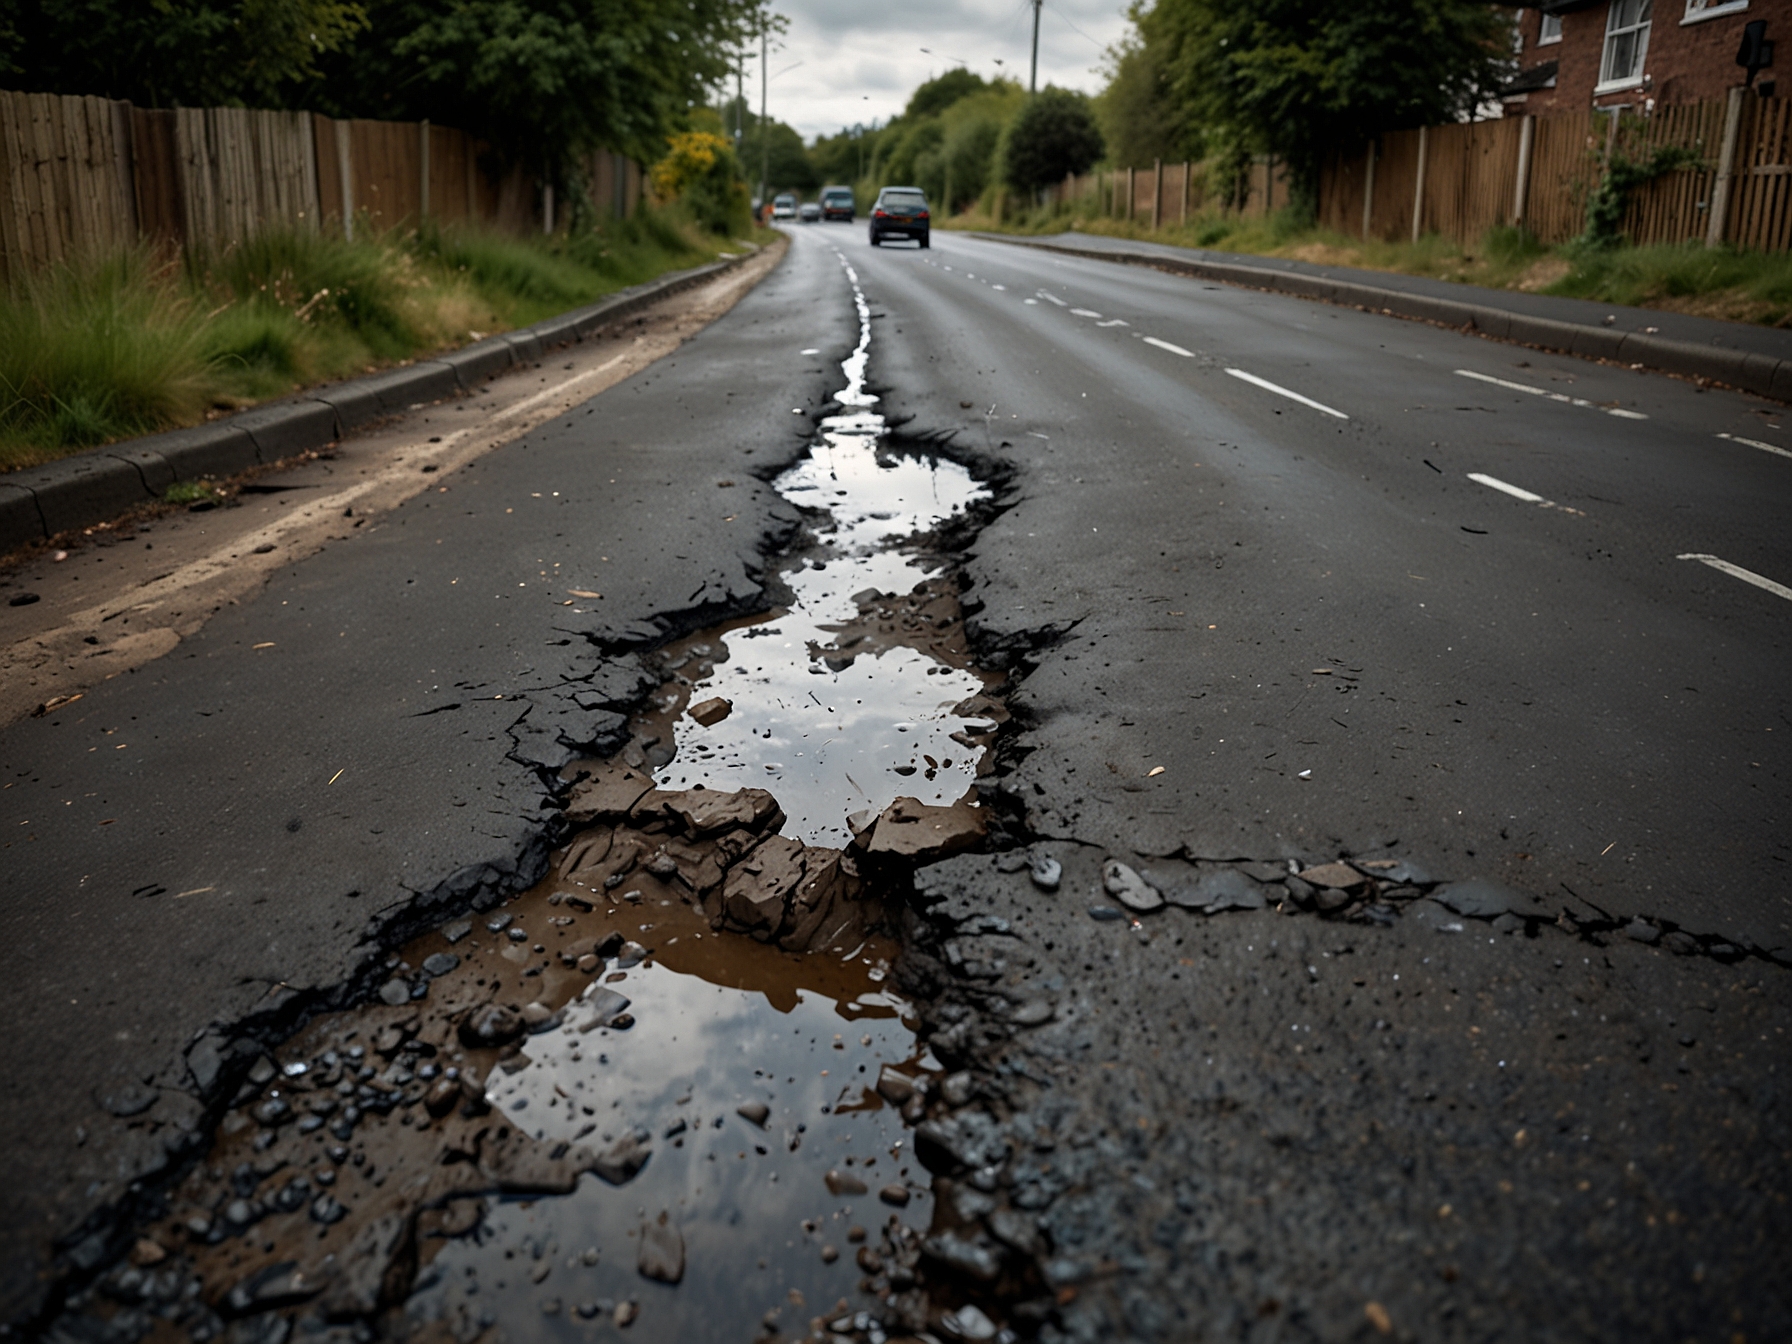 A pothole-riddled road in the UK captures the public's frustration with neglected infrastructure, reflecting underinvestment and rising repair costs for vehicles.